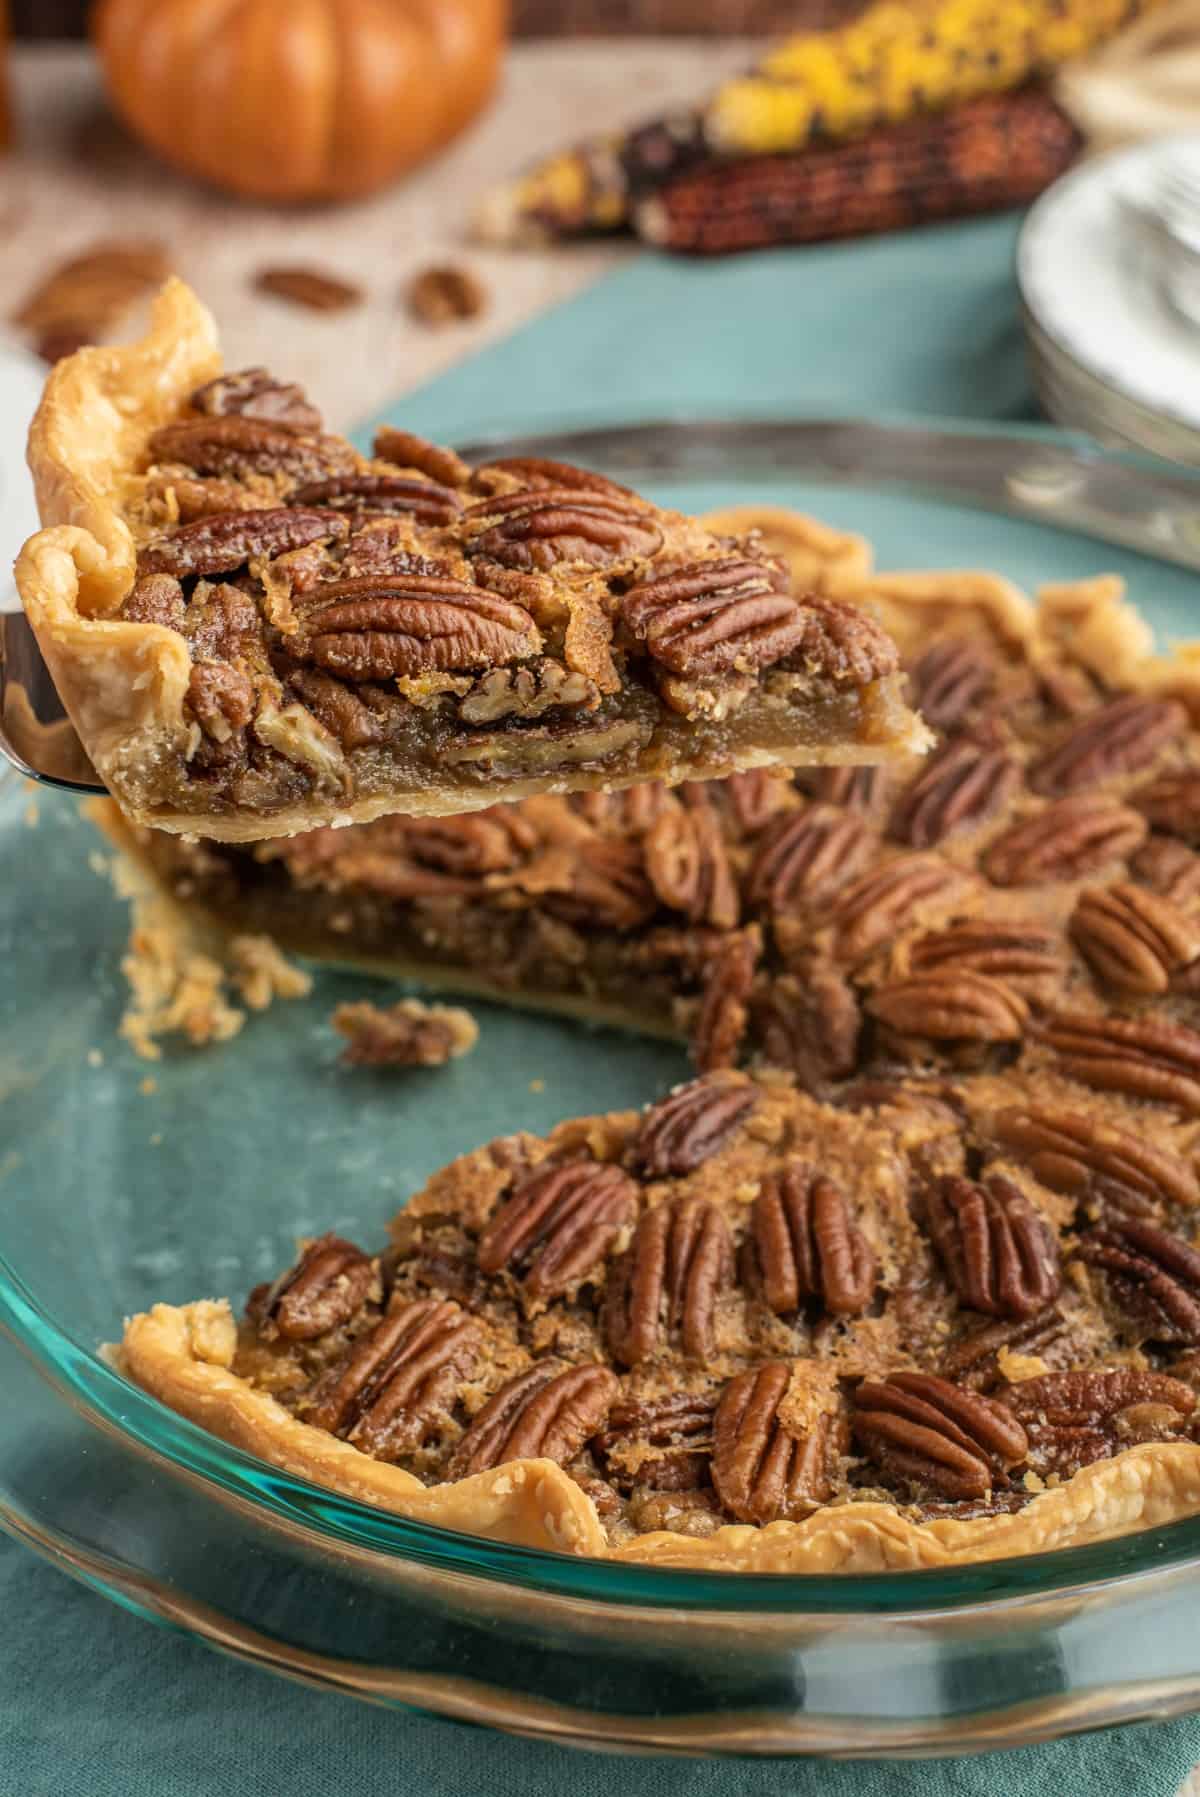 Pecan pie slice being lifted out of pie with spatula.